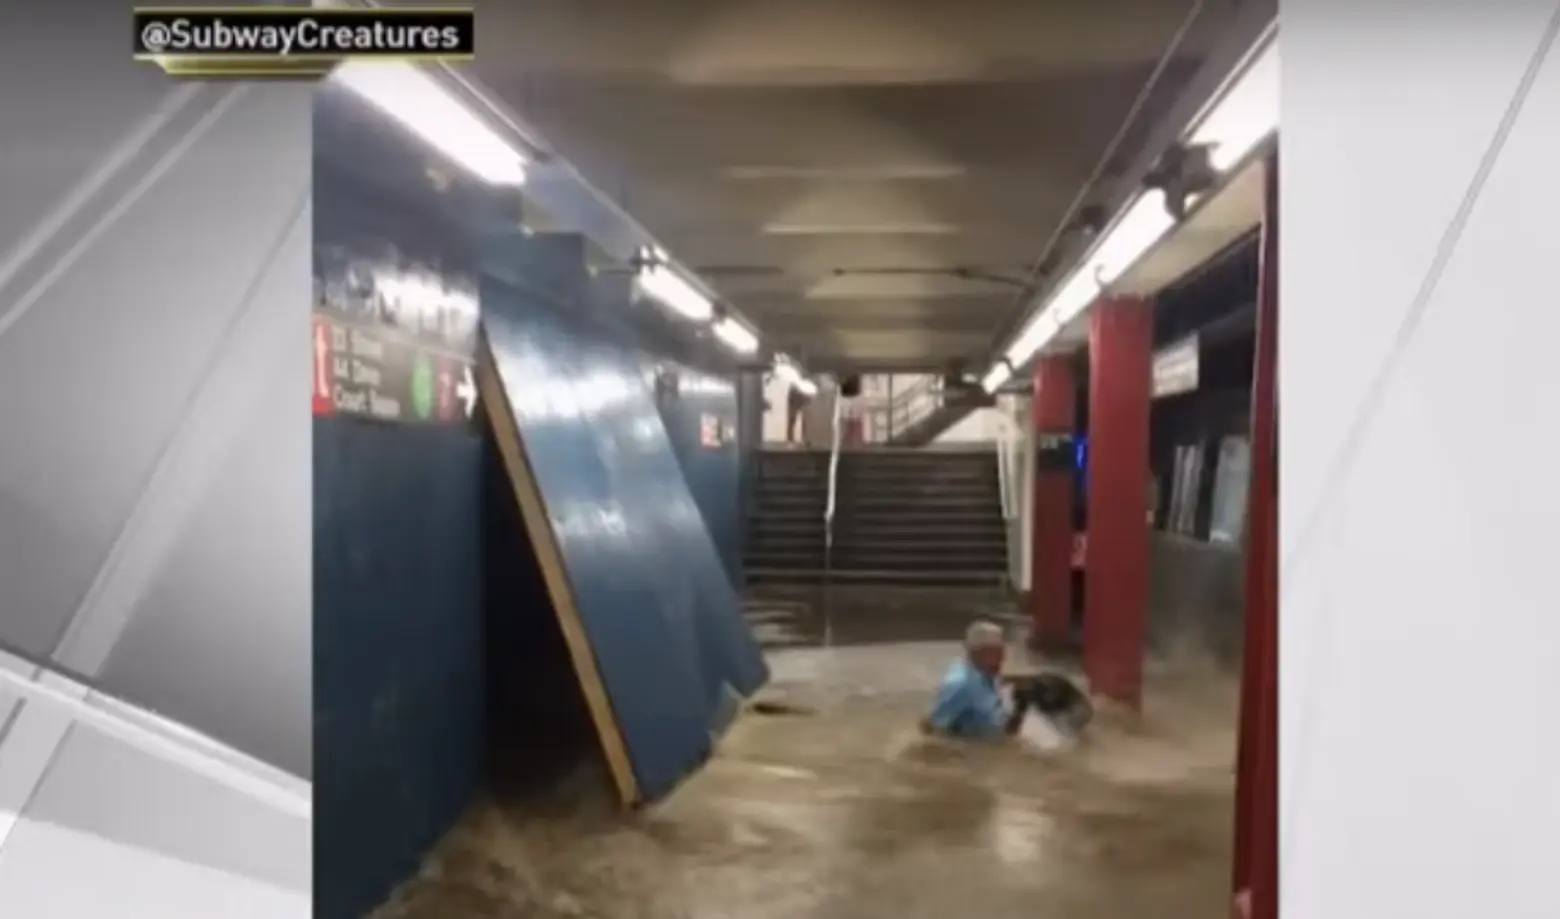 Deluge of dirty water from construction site next door floods Queens subway station